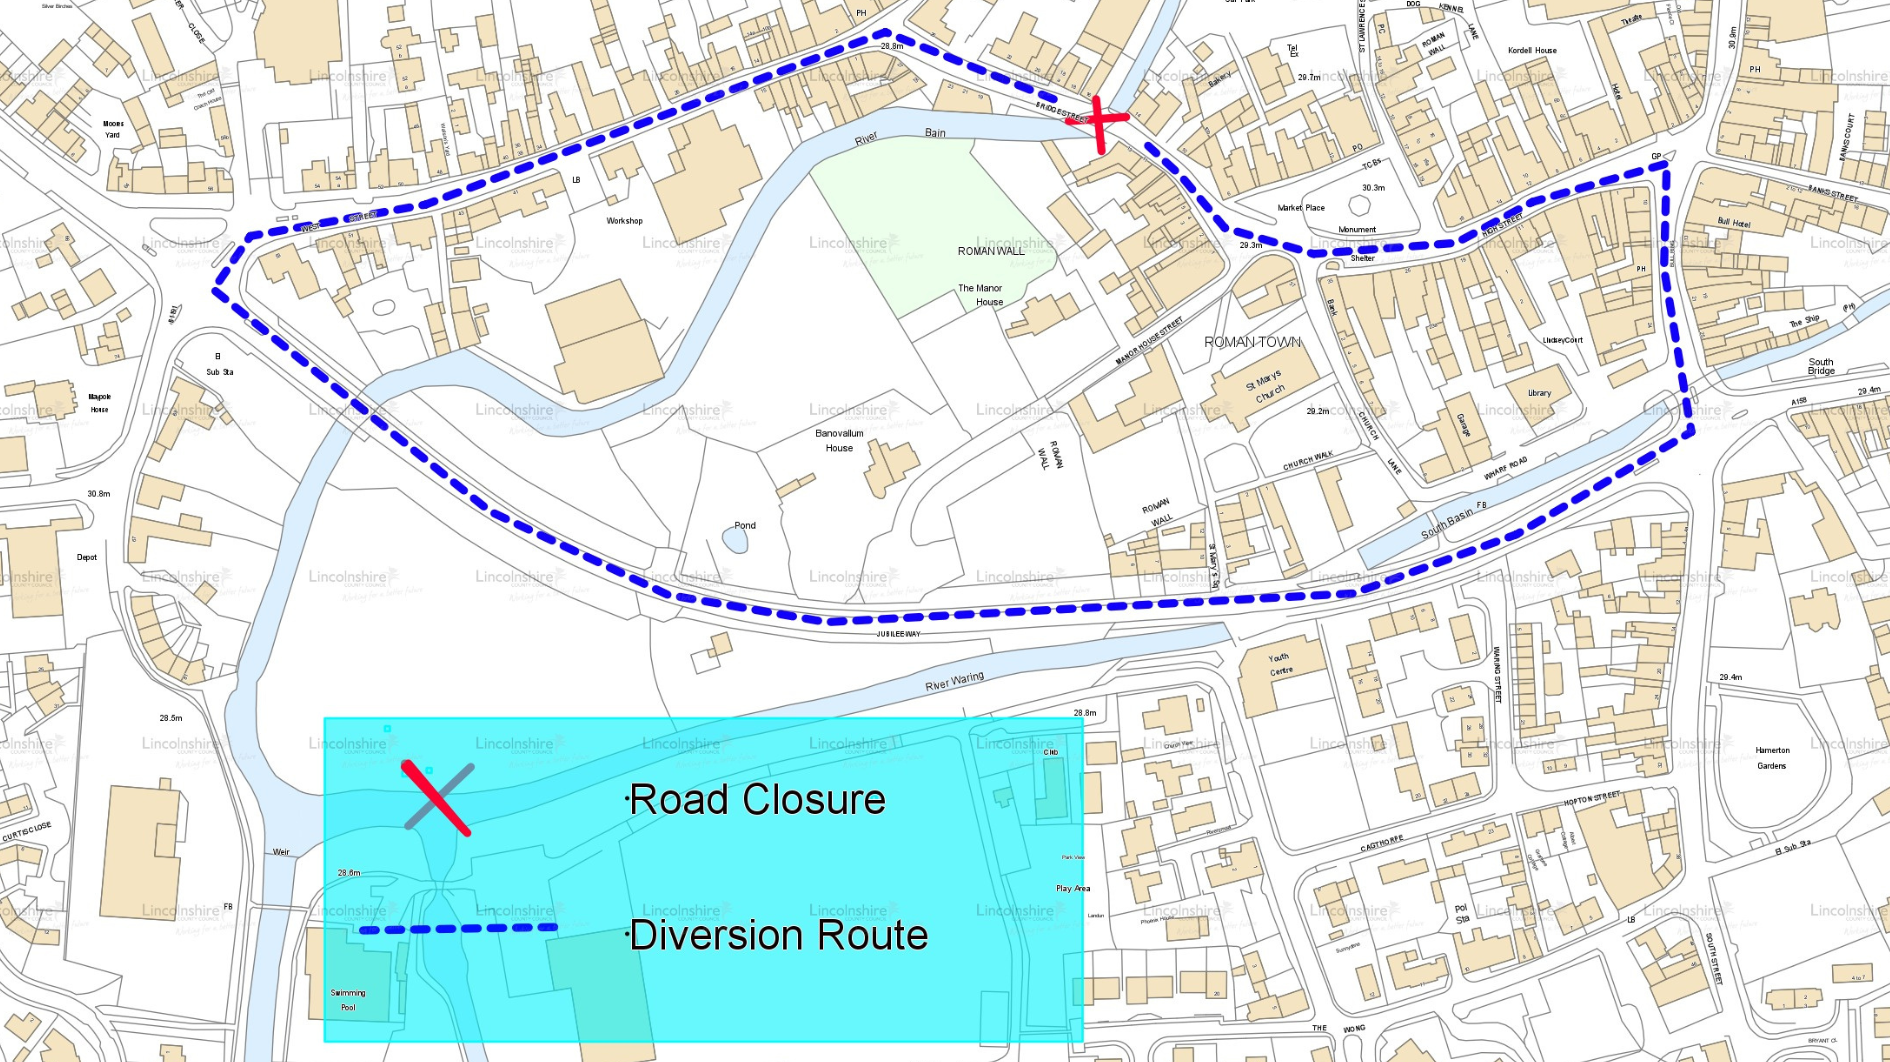 A map showing the diversion route